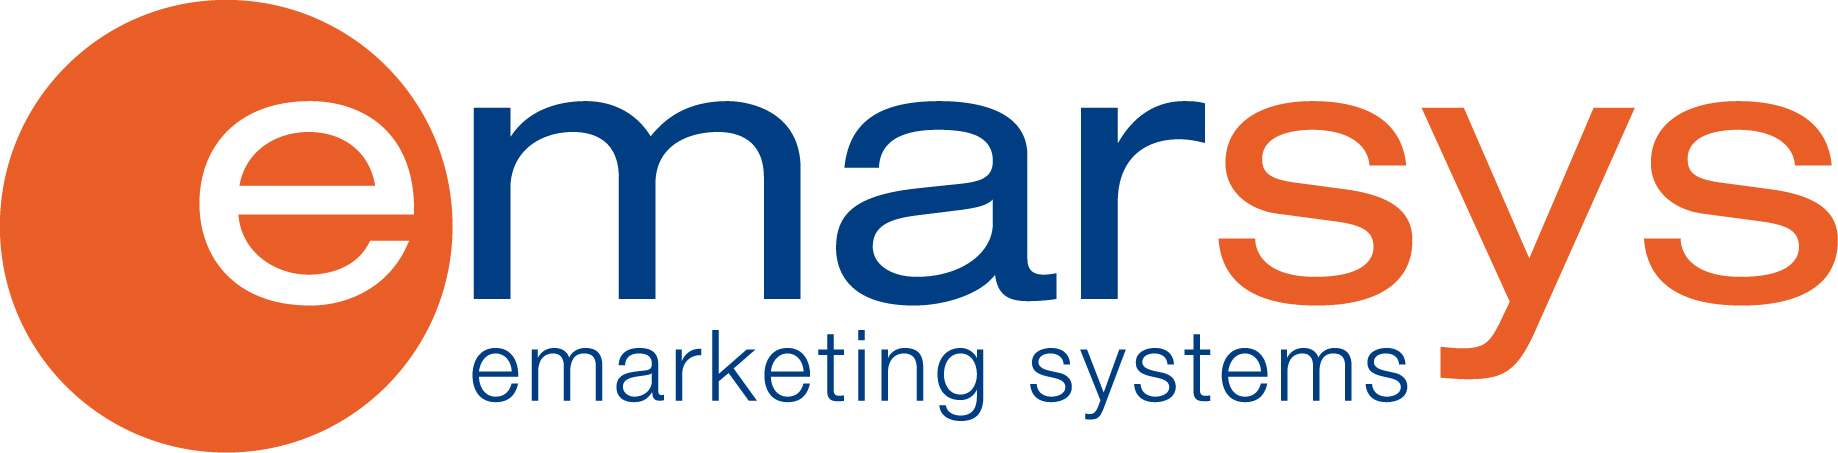 emarsys eMarketing Systems AG